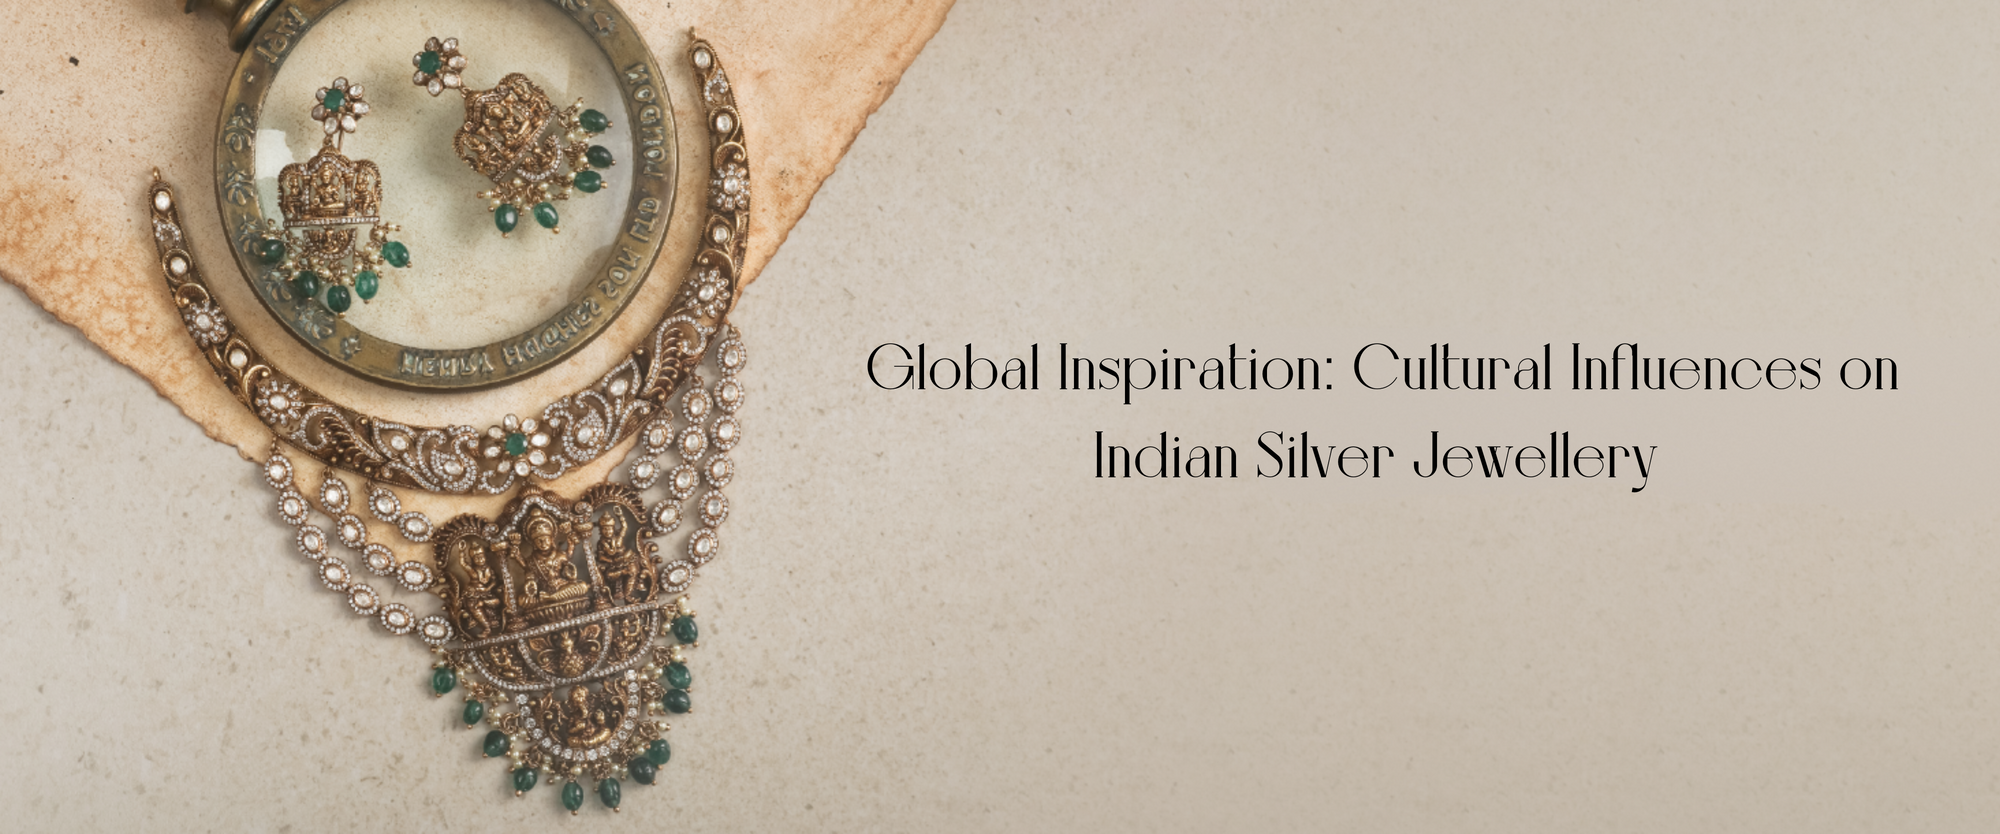 Global Inspiration: Cultural Influences on Indian Silver Jewellery